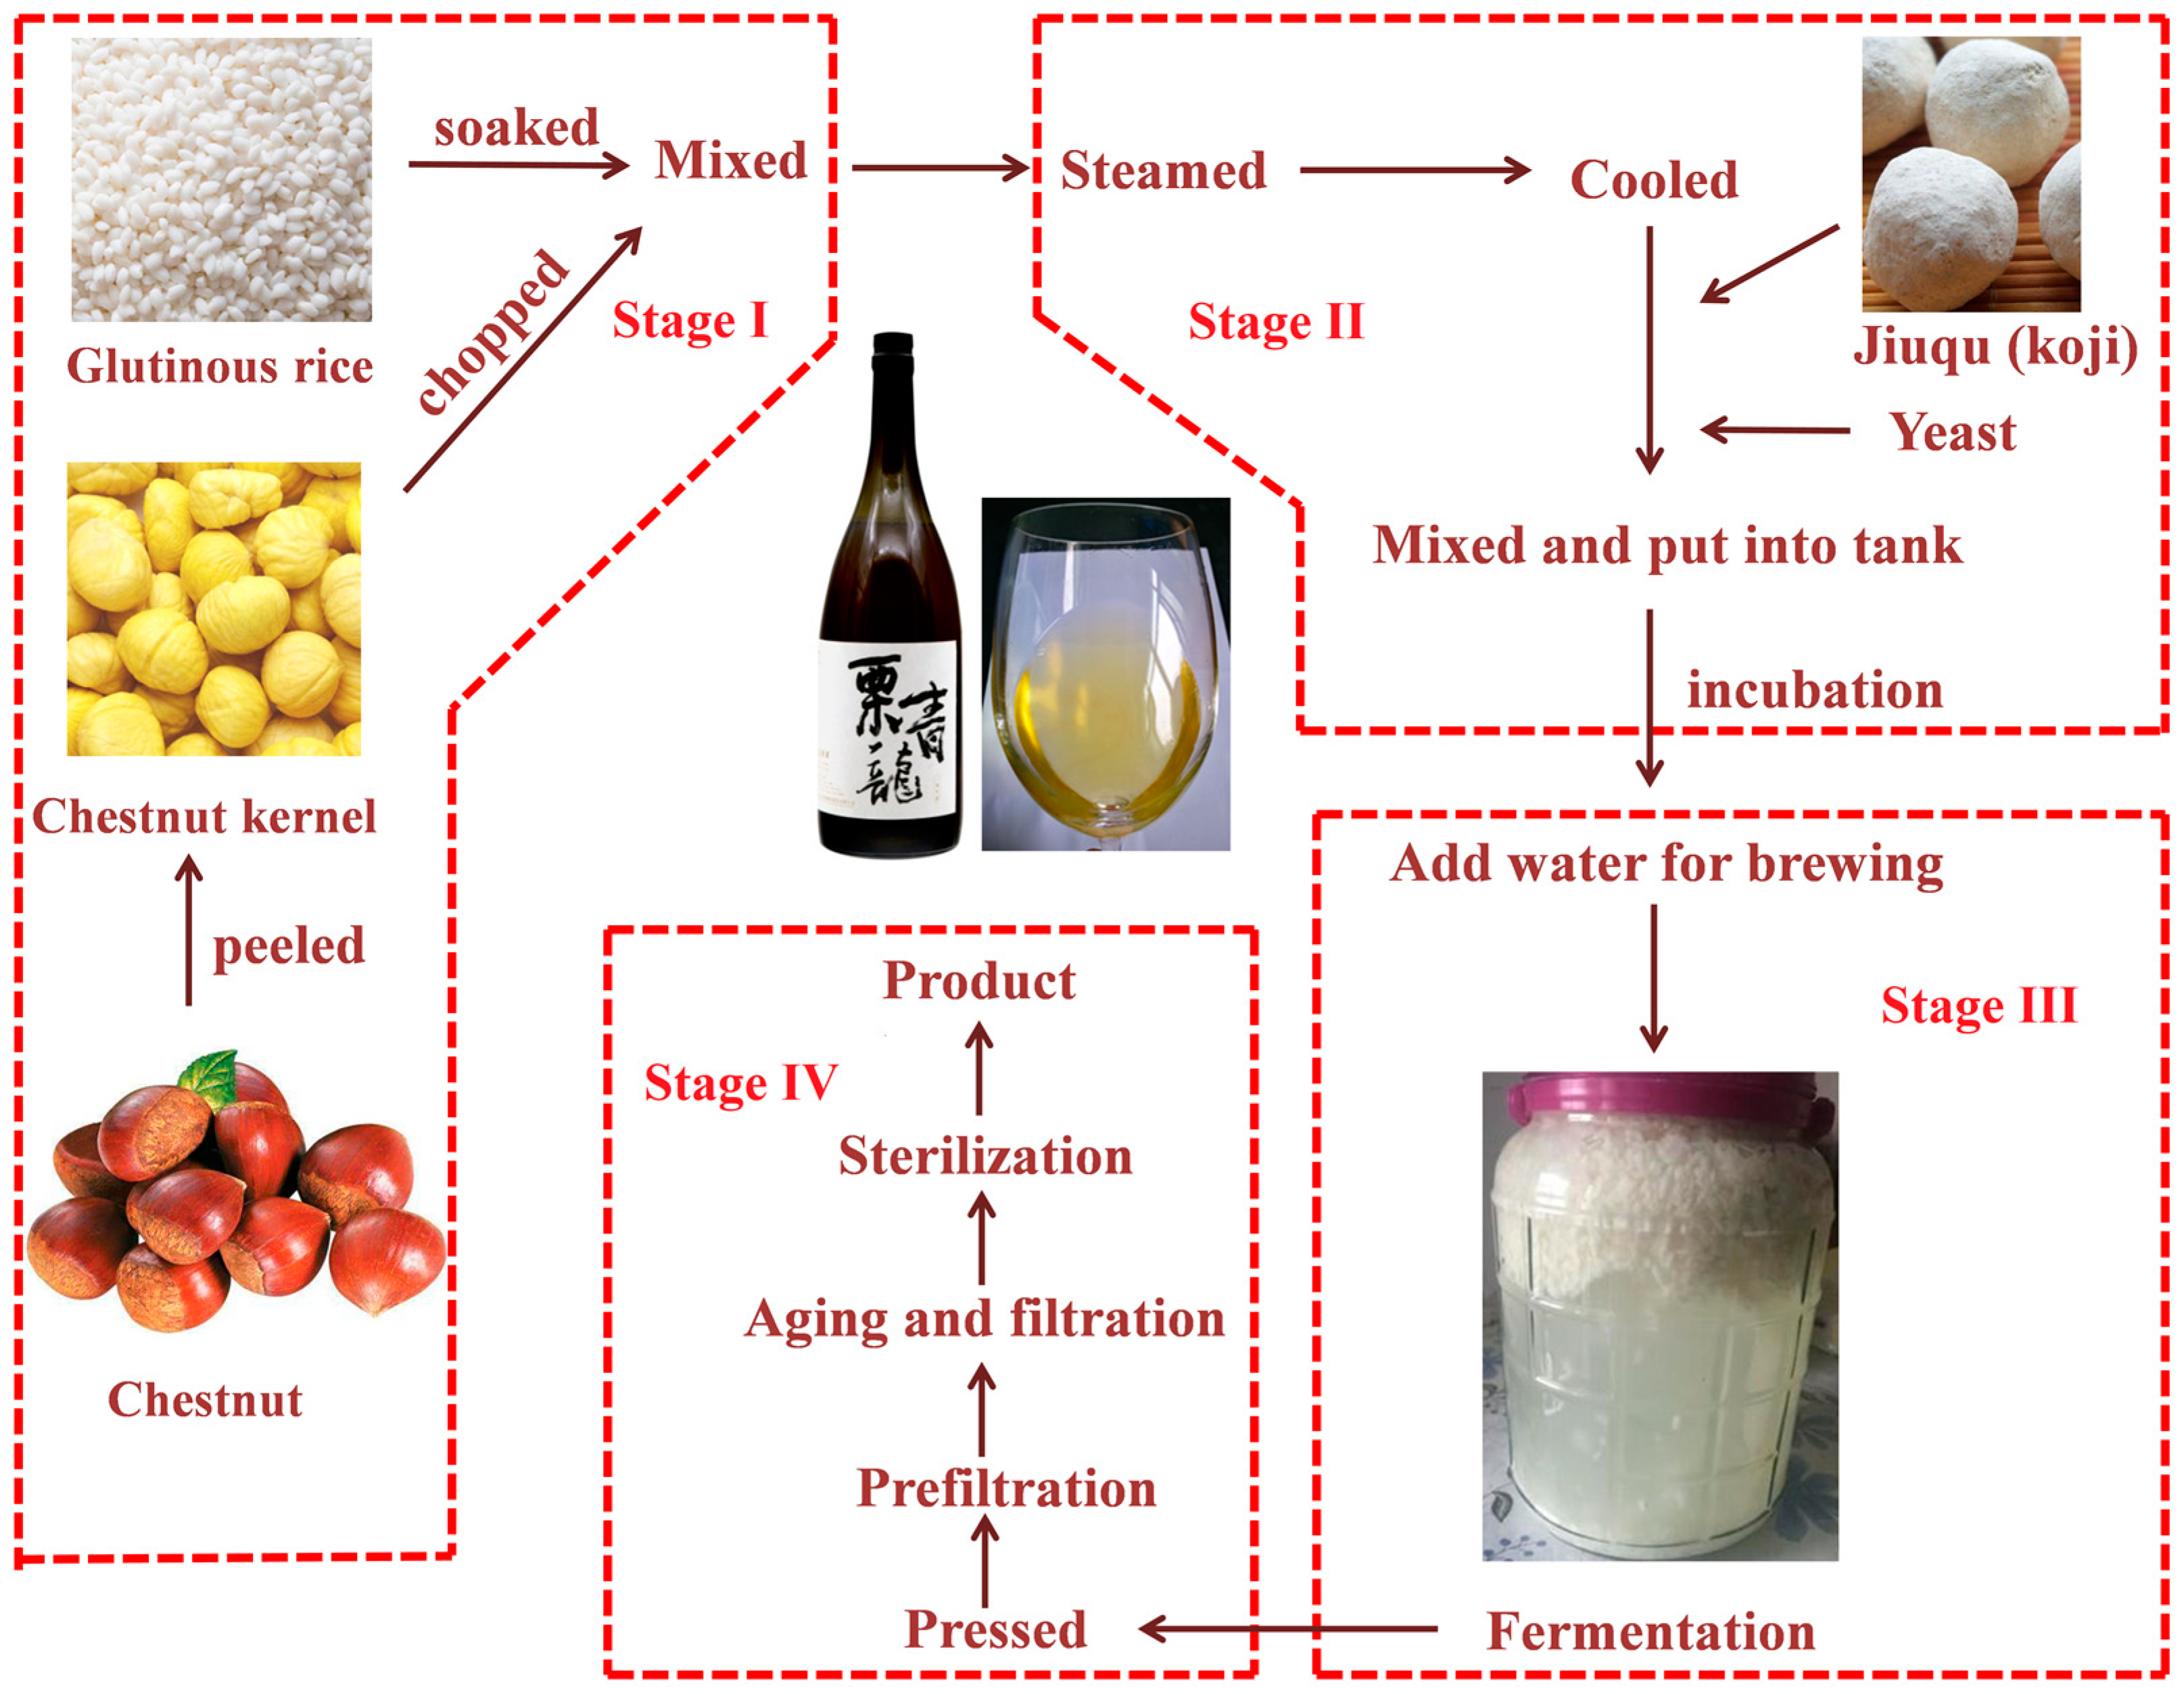 Fermentation | Full-Text | Changes in and Aroma-Related Fermentation Metabolites and Antioxidant Activity of Glutinous Rice Wine Supplemented with Chinese Chestnut (Castanea mollissima Blume)